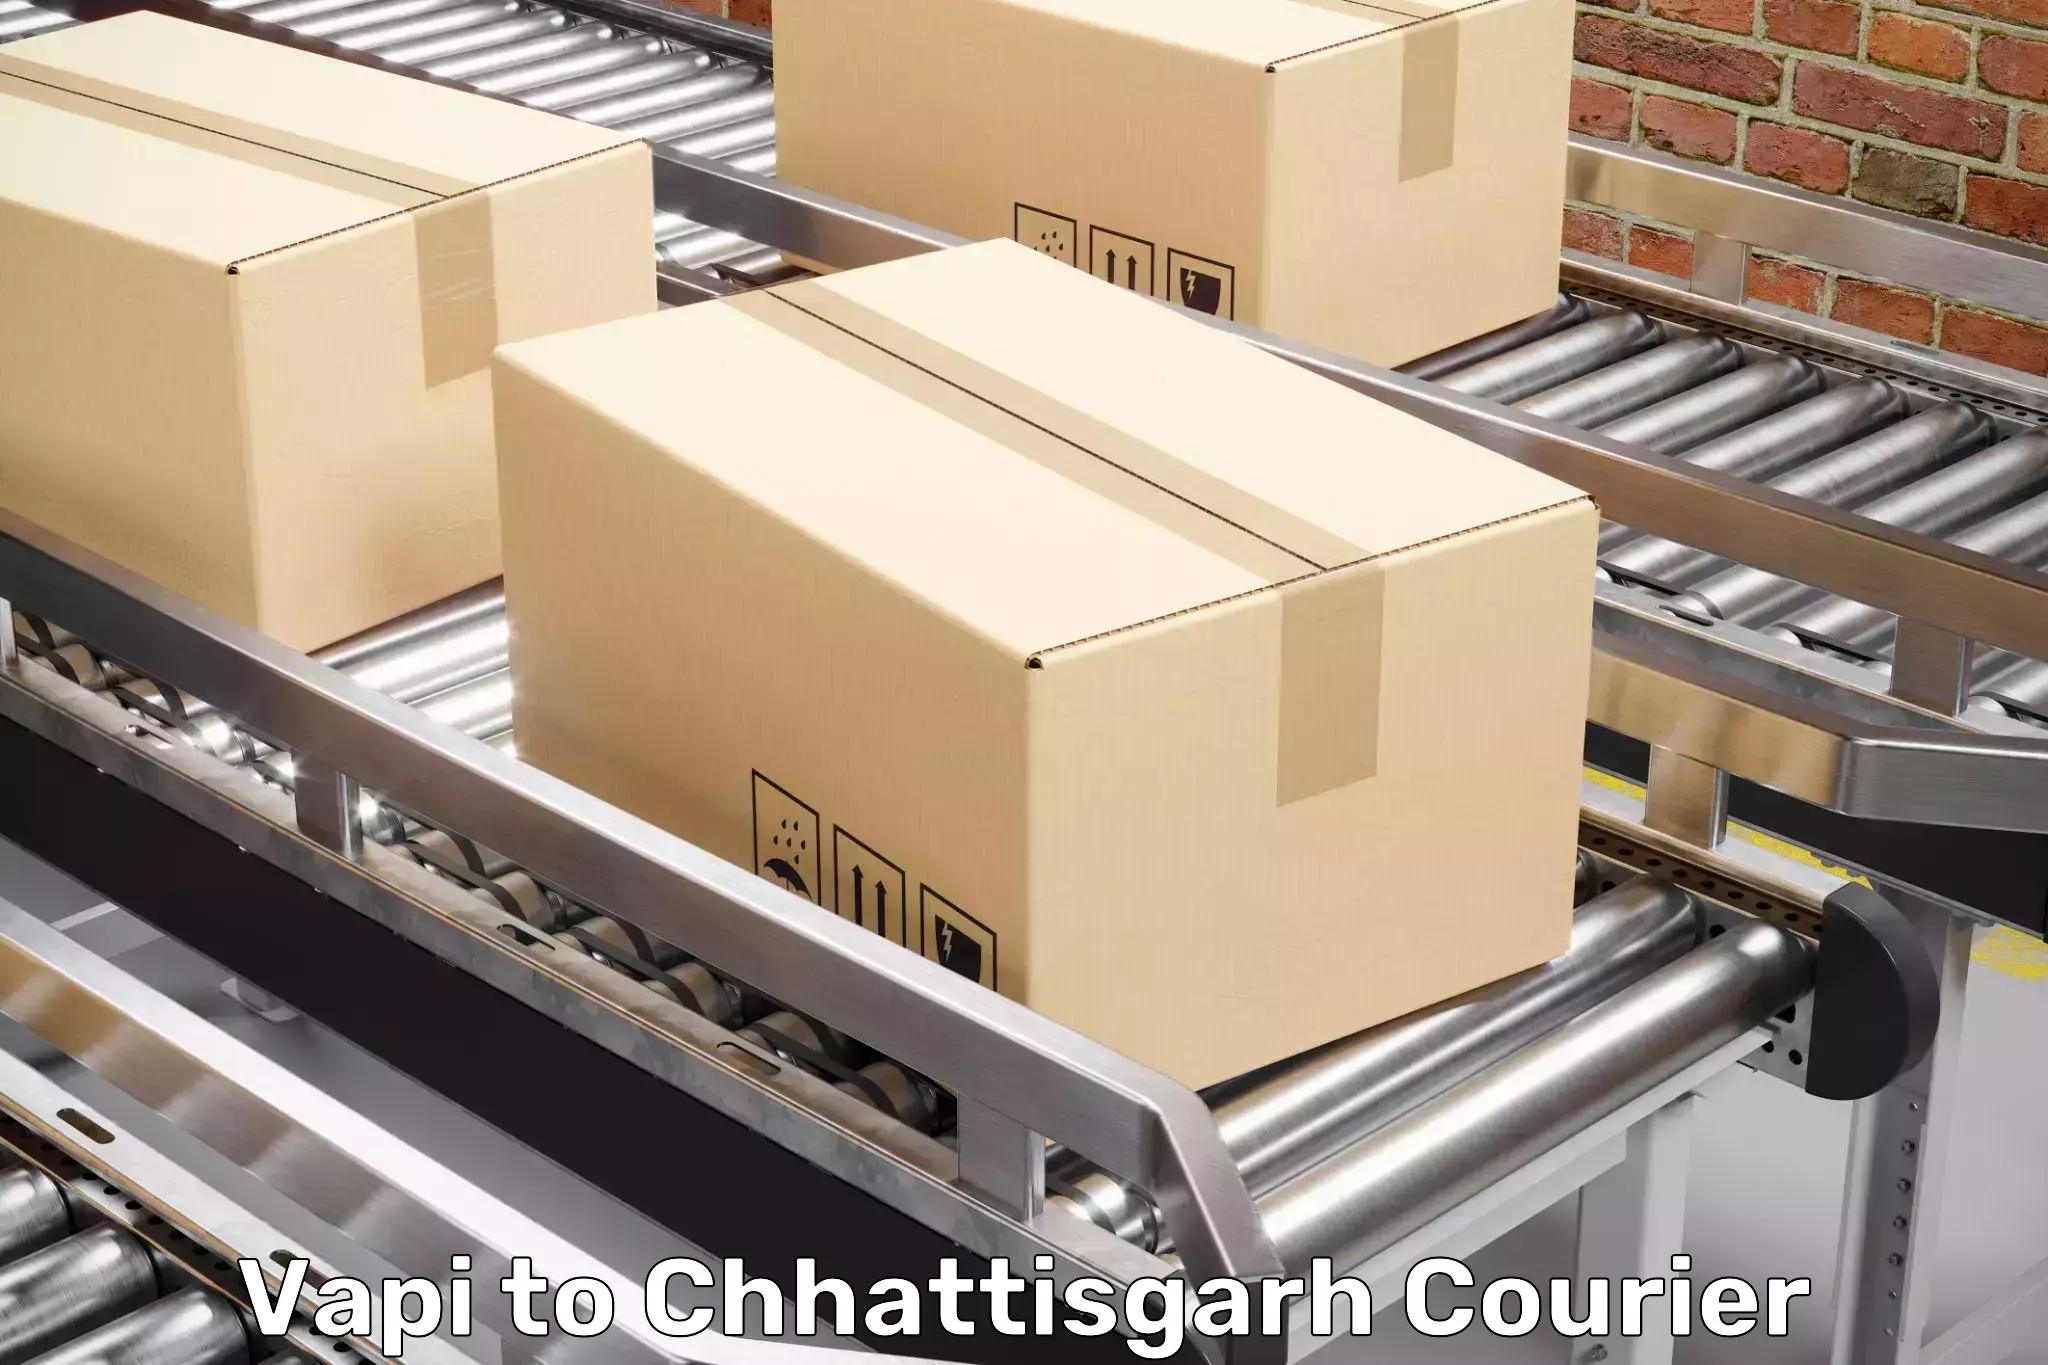 Moving and packing experts Vapi to Chhattisgarh